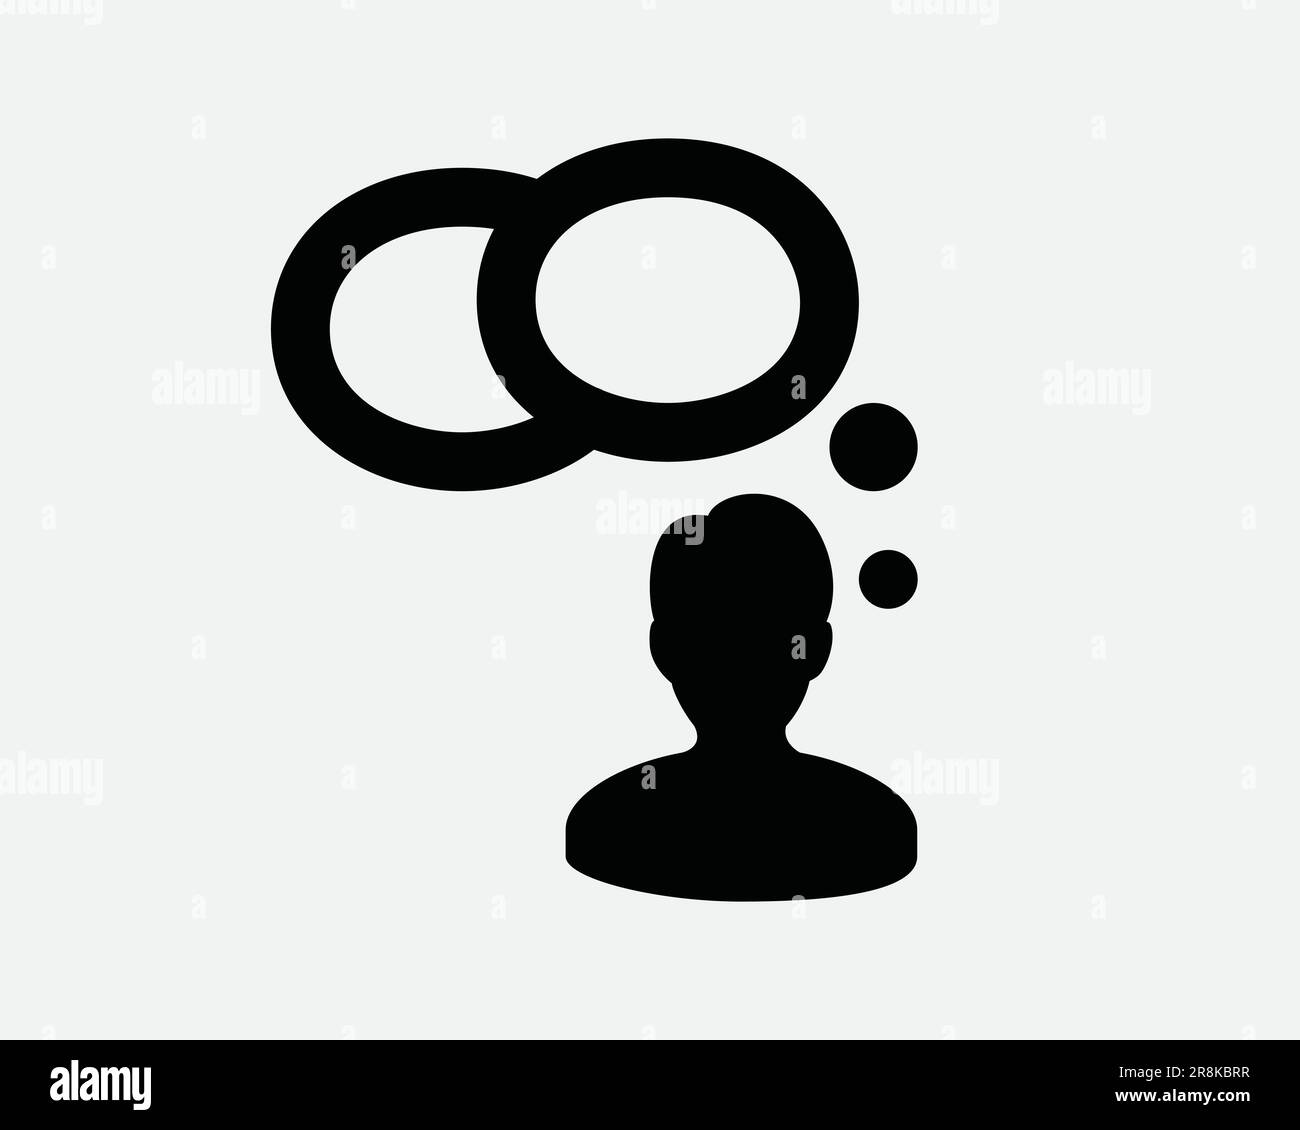 Man Thinking Icon. Thought Bubble Day Dreaming Think Process Brainstorm Mind. Black White Sign Symbol Illustration Artwork Graphic Clipart EPS Vector Stock Vector